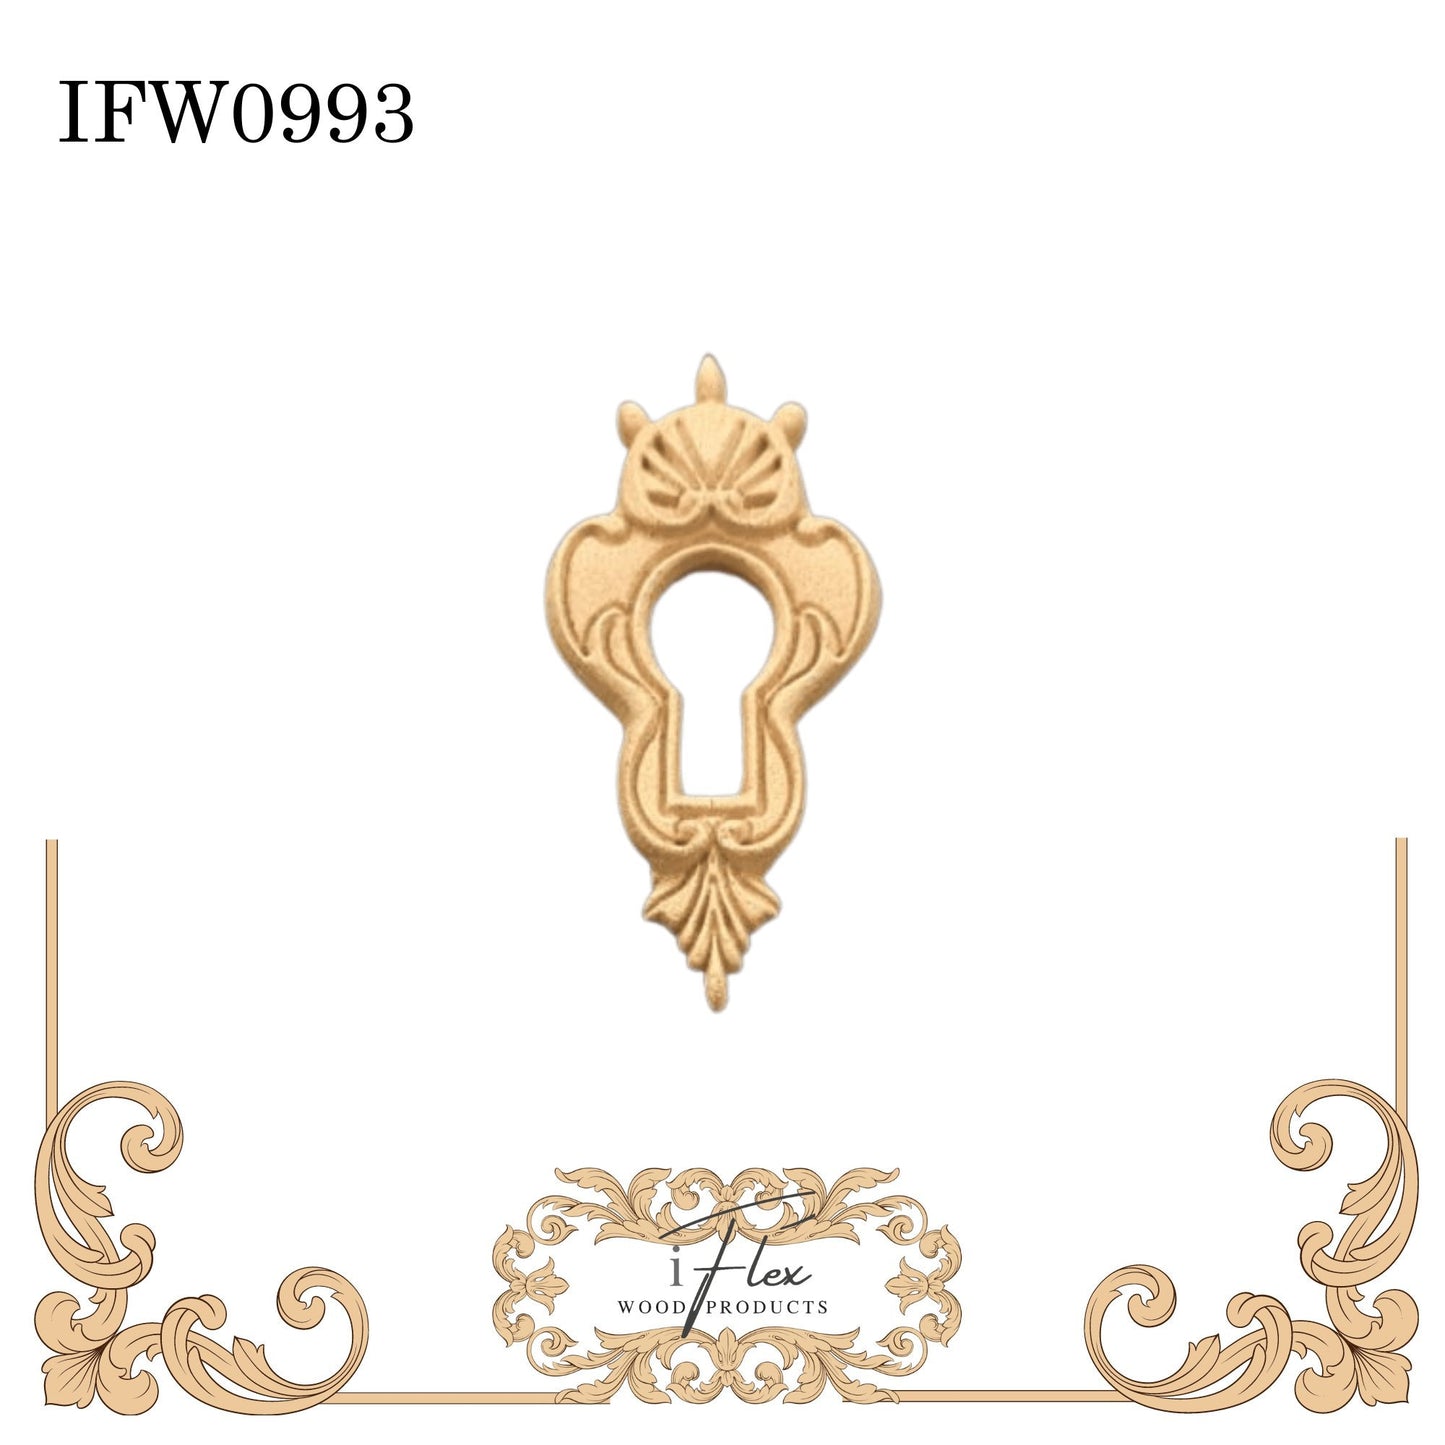 IFW 0993 iFlex Wood Products, bendable mouldings, flexible, wooden appliques, keyhole